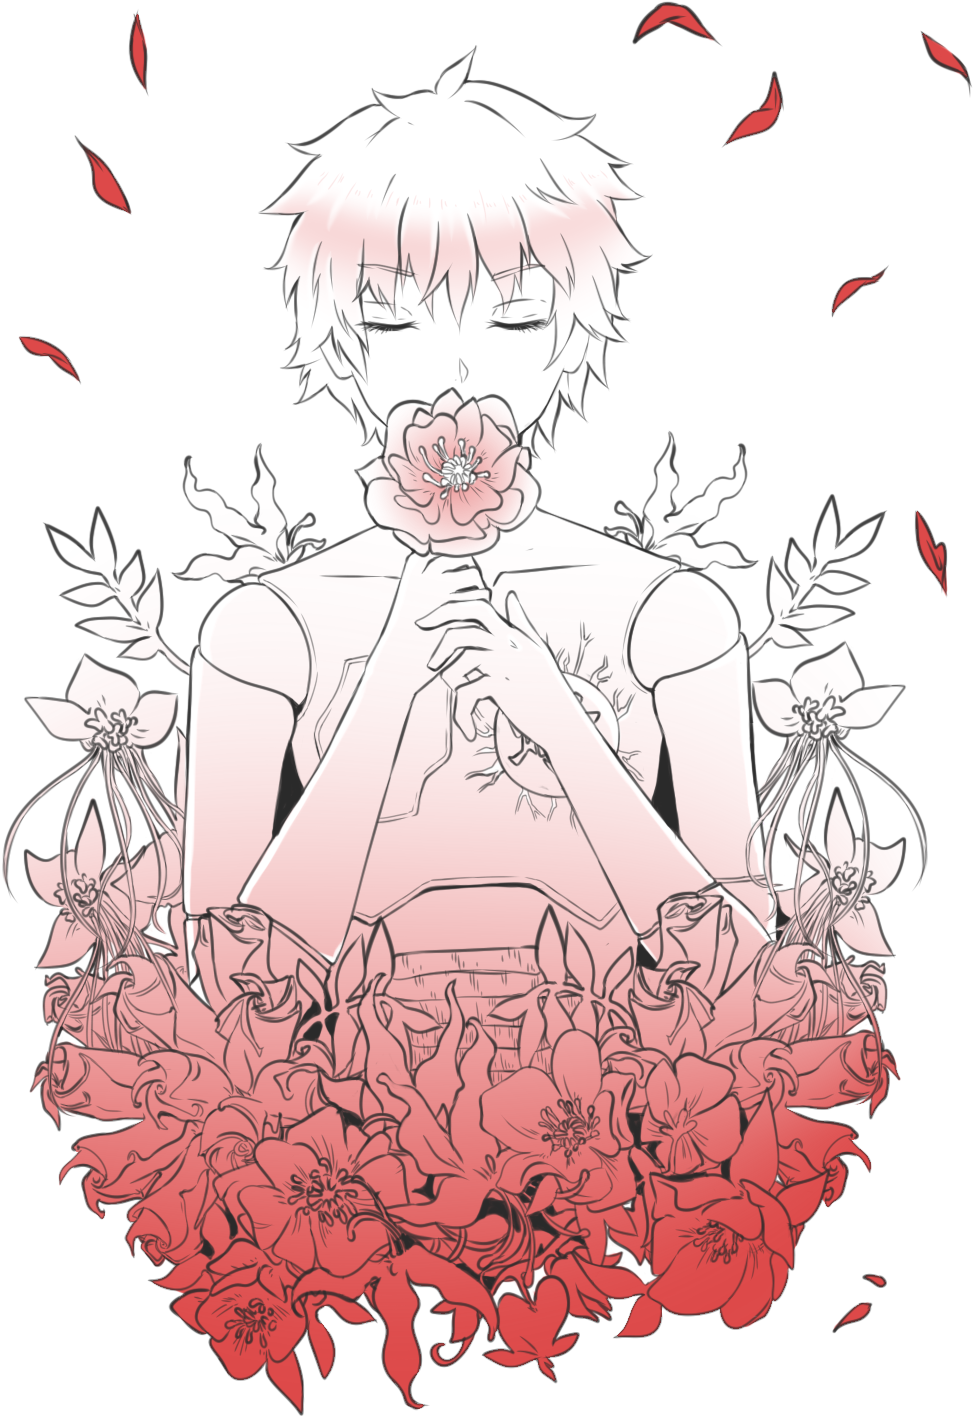 Anime Characterwith Flowerand Red Leaves